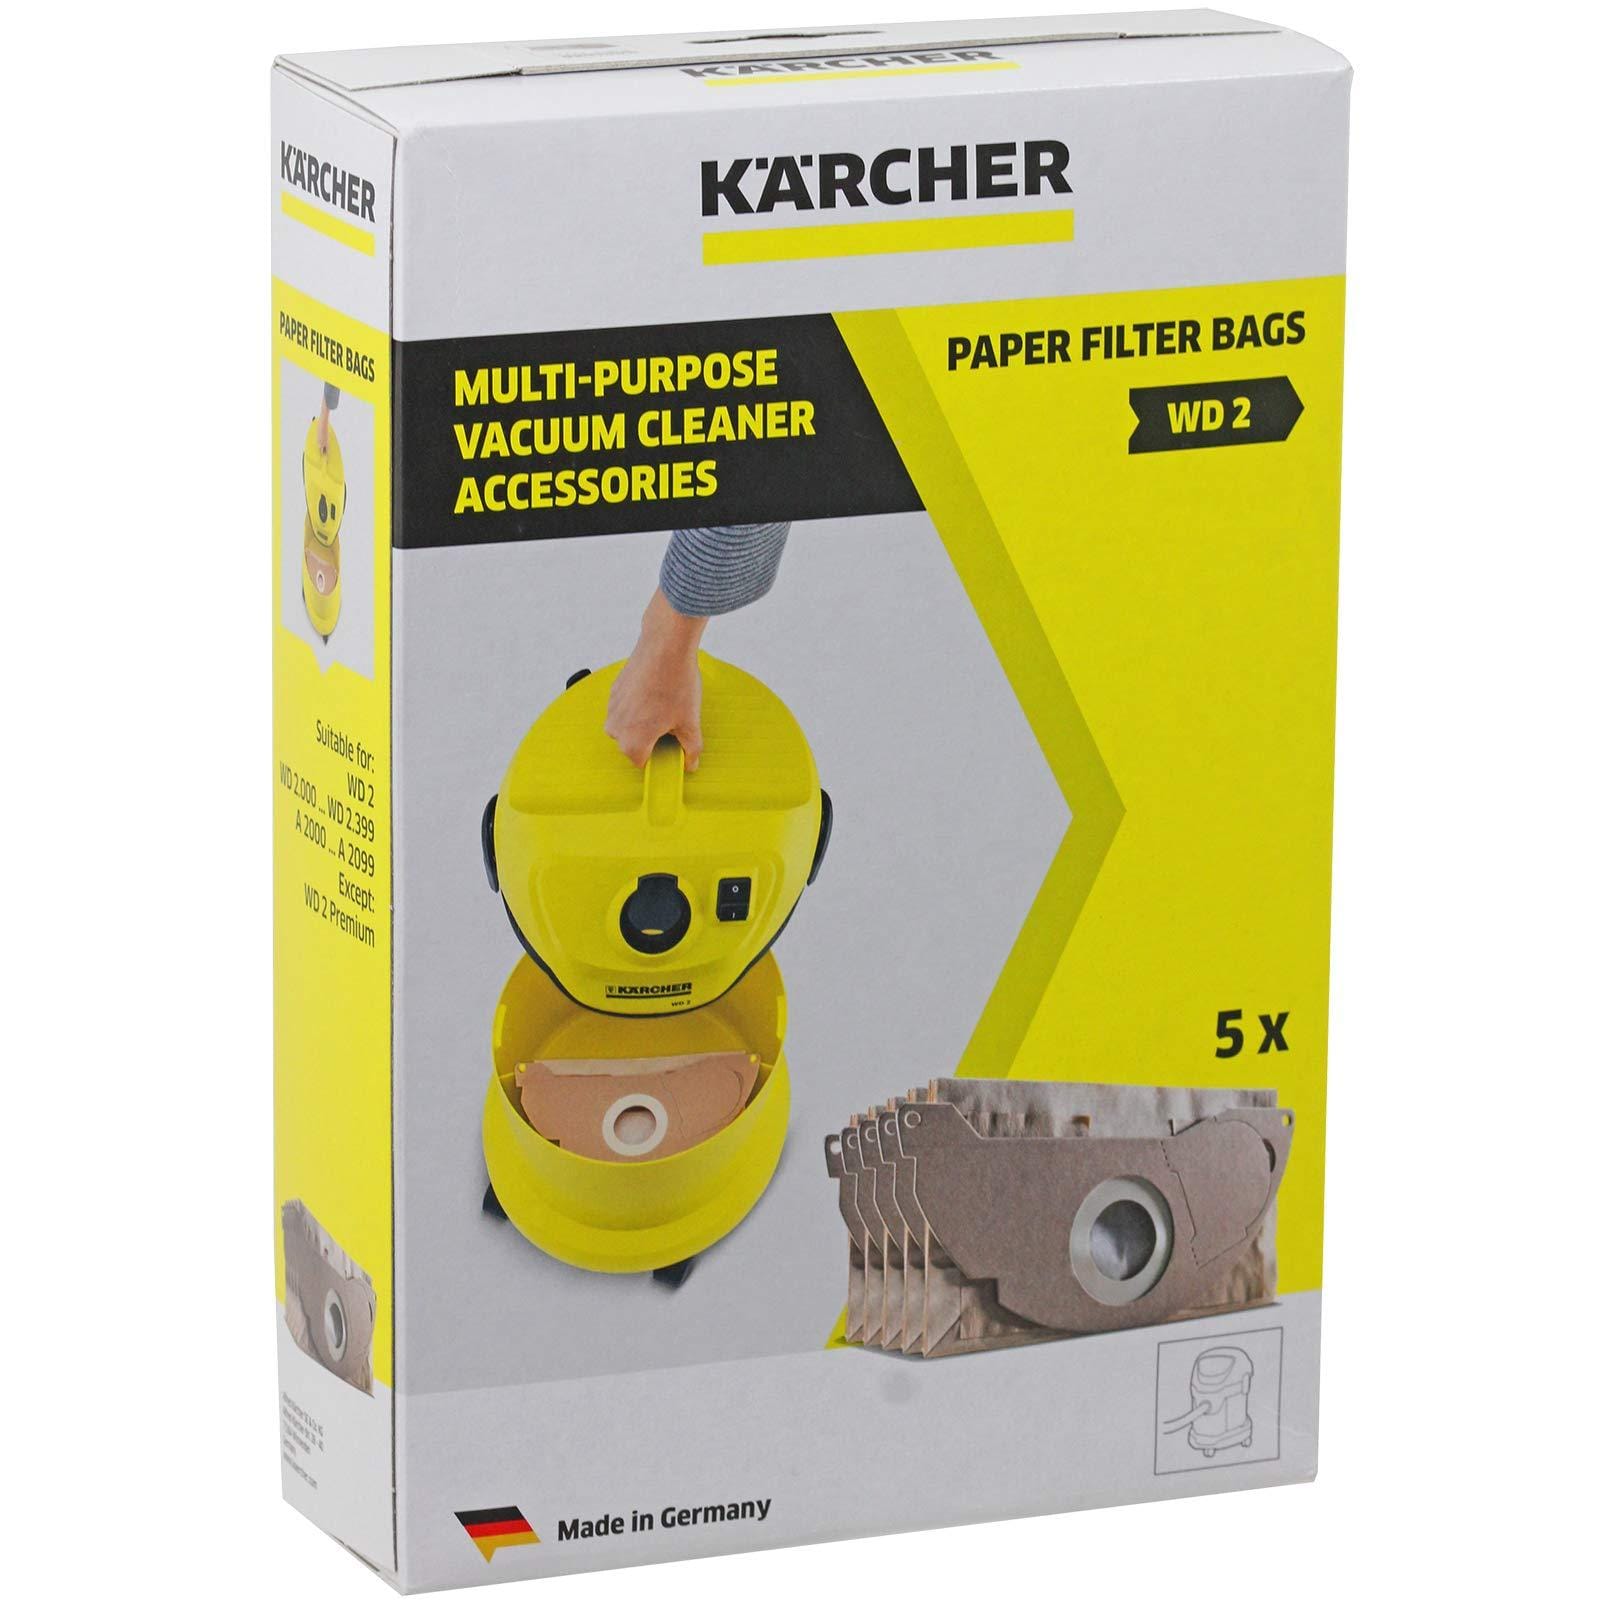 Karcher 5 Pieces Filter Bags Paper - WD 2 | Supply Master | Accra, Ghana Cleaning Equipment Accessories Buy Tools hardware Building materials